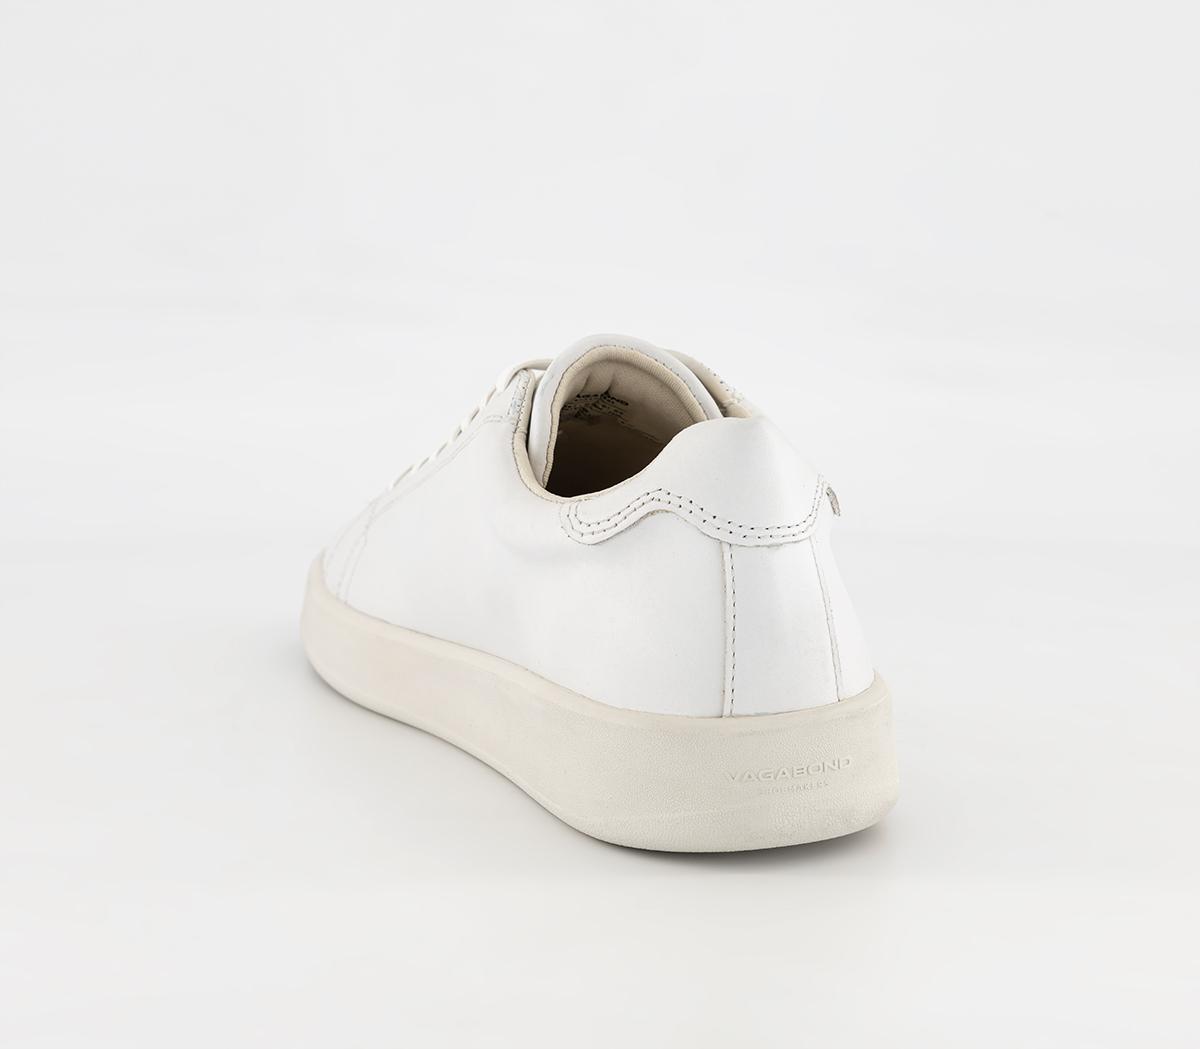 Vagabond Shoemakers Teo Trainers White - Men's Casual Shoes